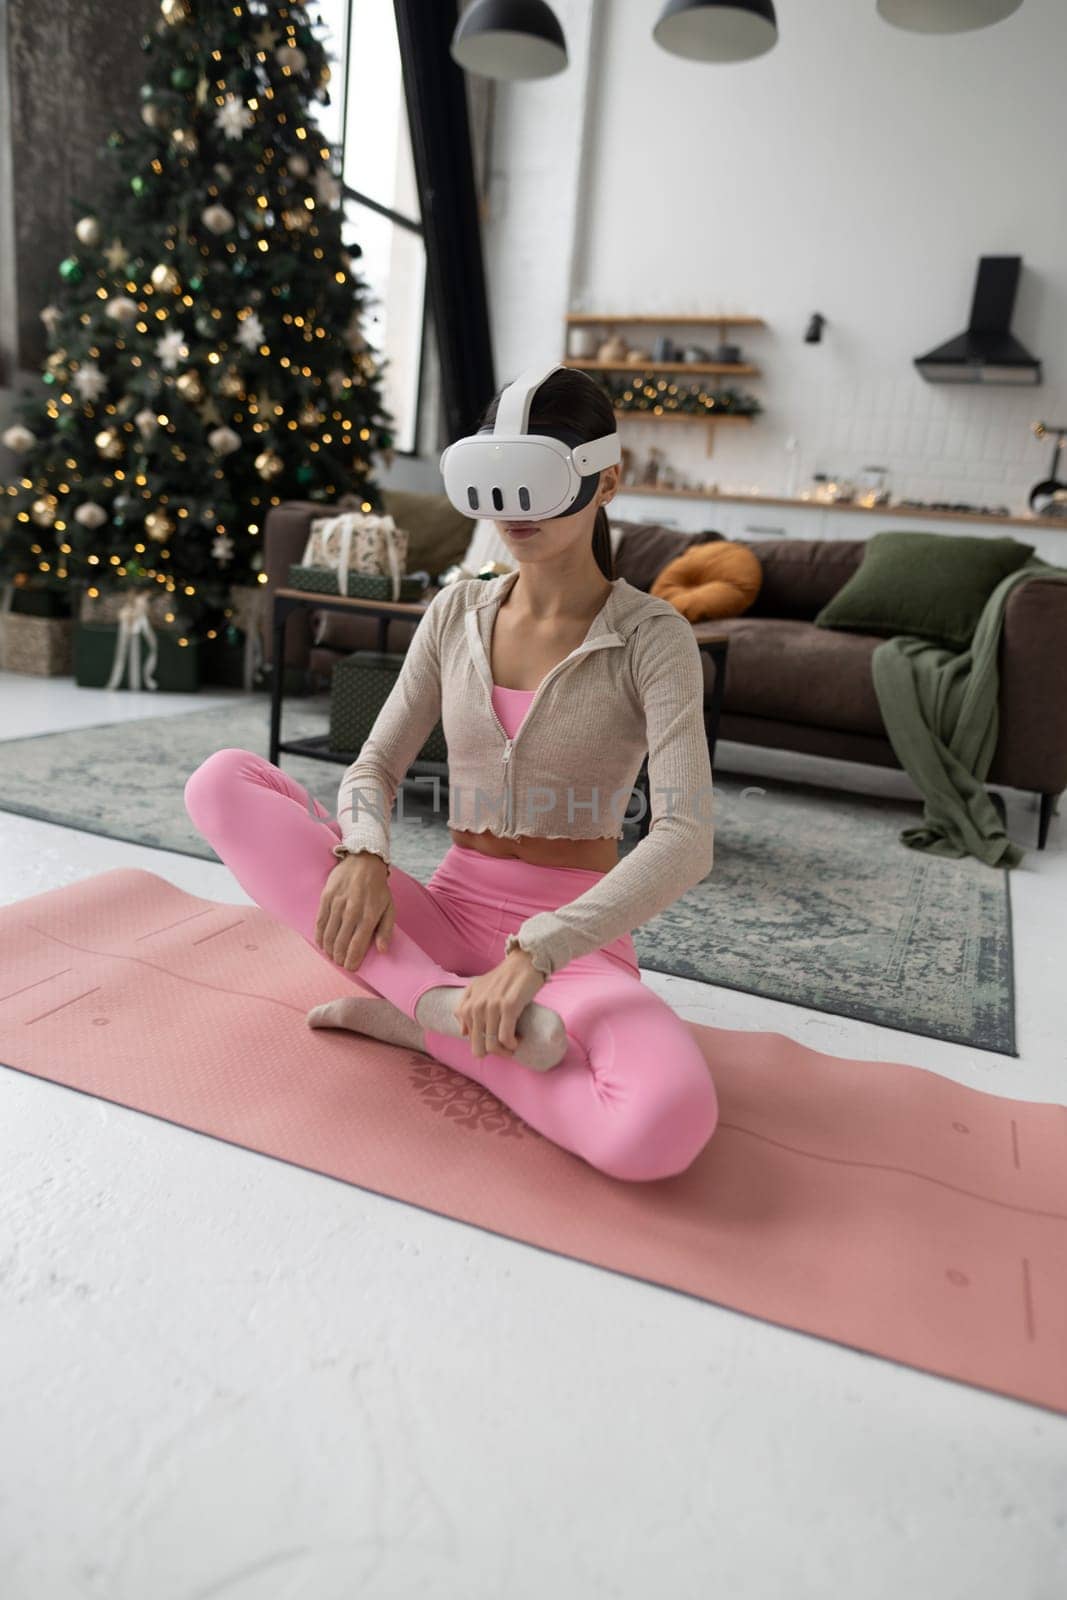 In pink workout attire, a woman engages in yoga while wearing VR goggles. by teksomolika